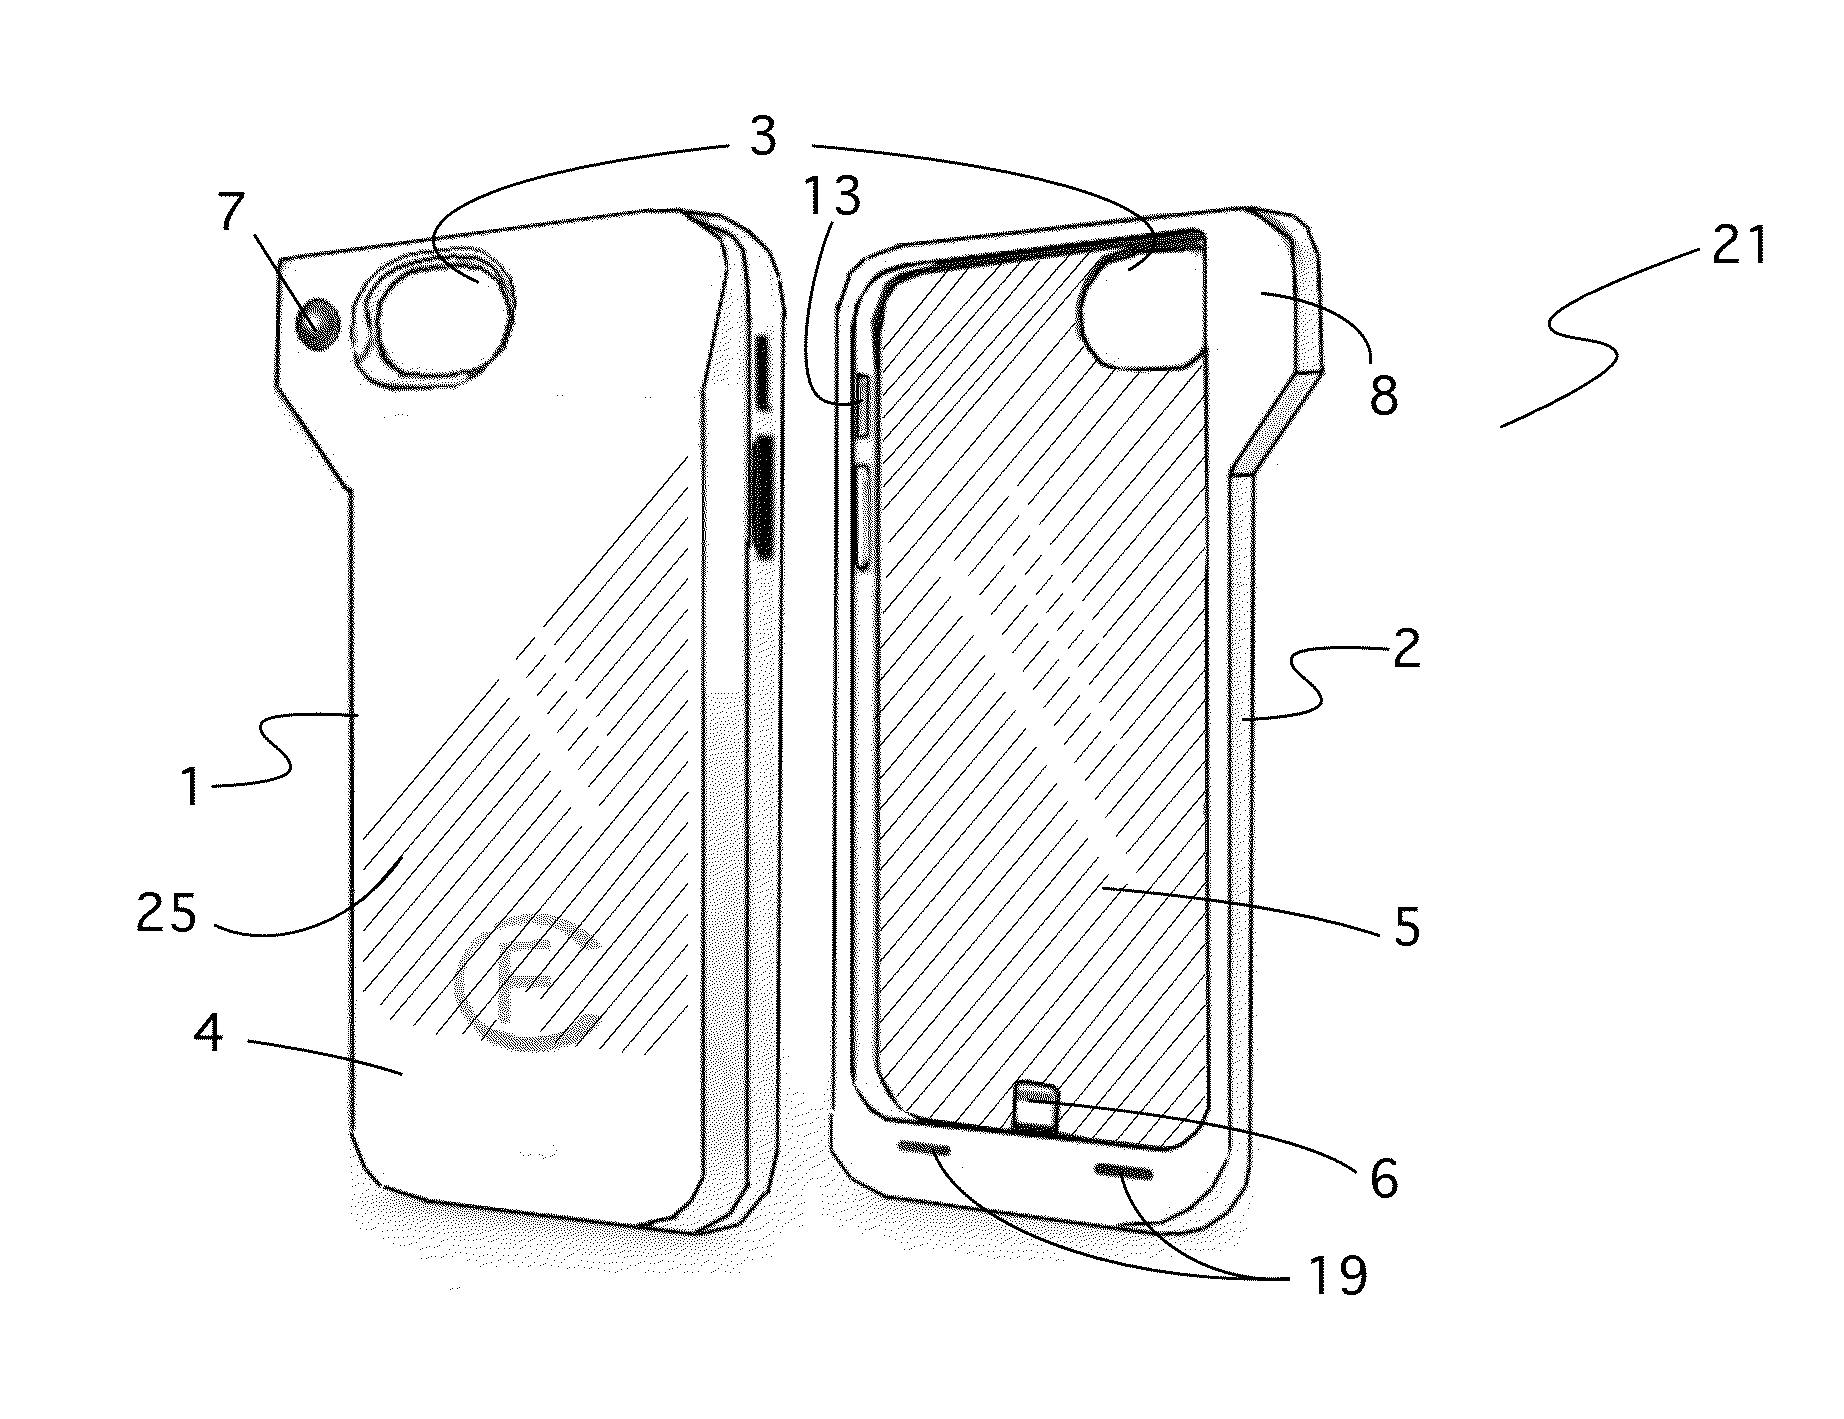 Sensing case for a mobile communication device